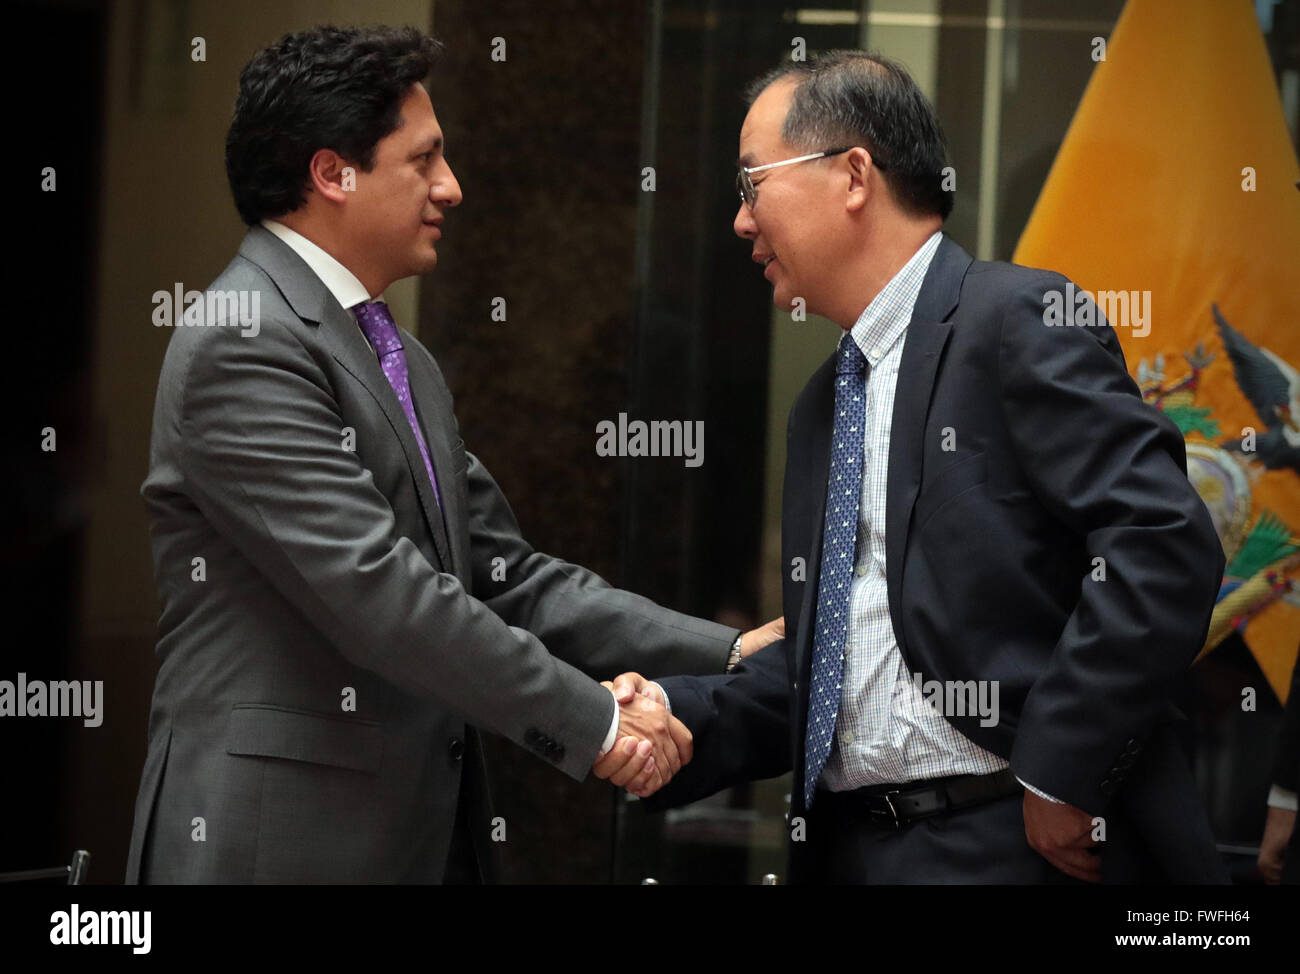 (160405) -- QUITO, April 5, 2016 (Xinhua) -- Chen Weilong (R), representative of China's Sinopec International and a member of Penaturi Consortium, shakes hands with Rafael Poveda, coordinating minister of strategic sectors of Ecuador, after the signing of a service contract in the Protocolar Hall of Ecuador's Vicepresidency, in Quito, capital of Ecuador, on April 4, 2016. Ecuador's government-owned Petroamazonas signed nine service contracts on Monday with international consortiums in efforts to develop its mature oil fields. Panaturi Consortium, made up of China's Sinopec International and S Stock Photo